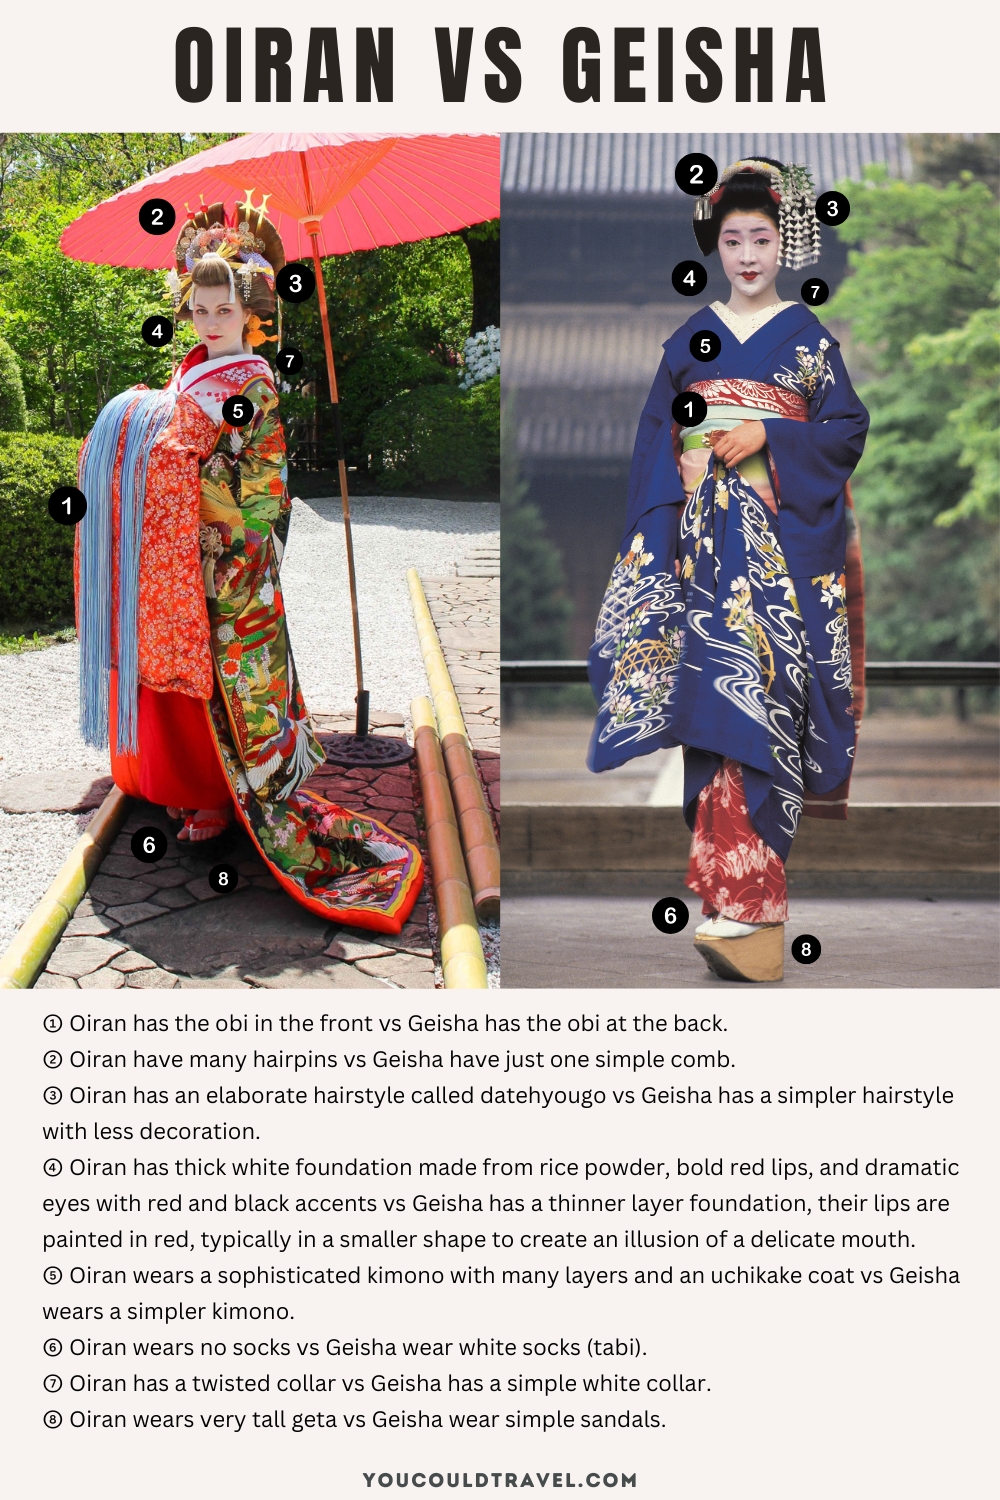 Oiran vs Geisha - How to differentiate between the two